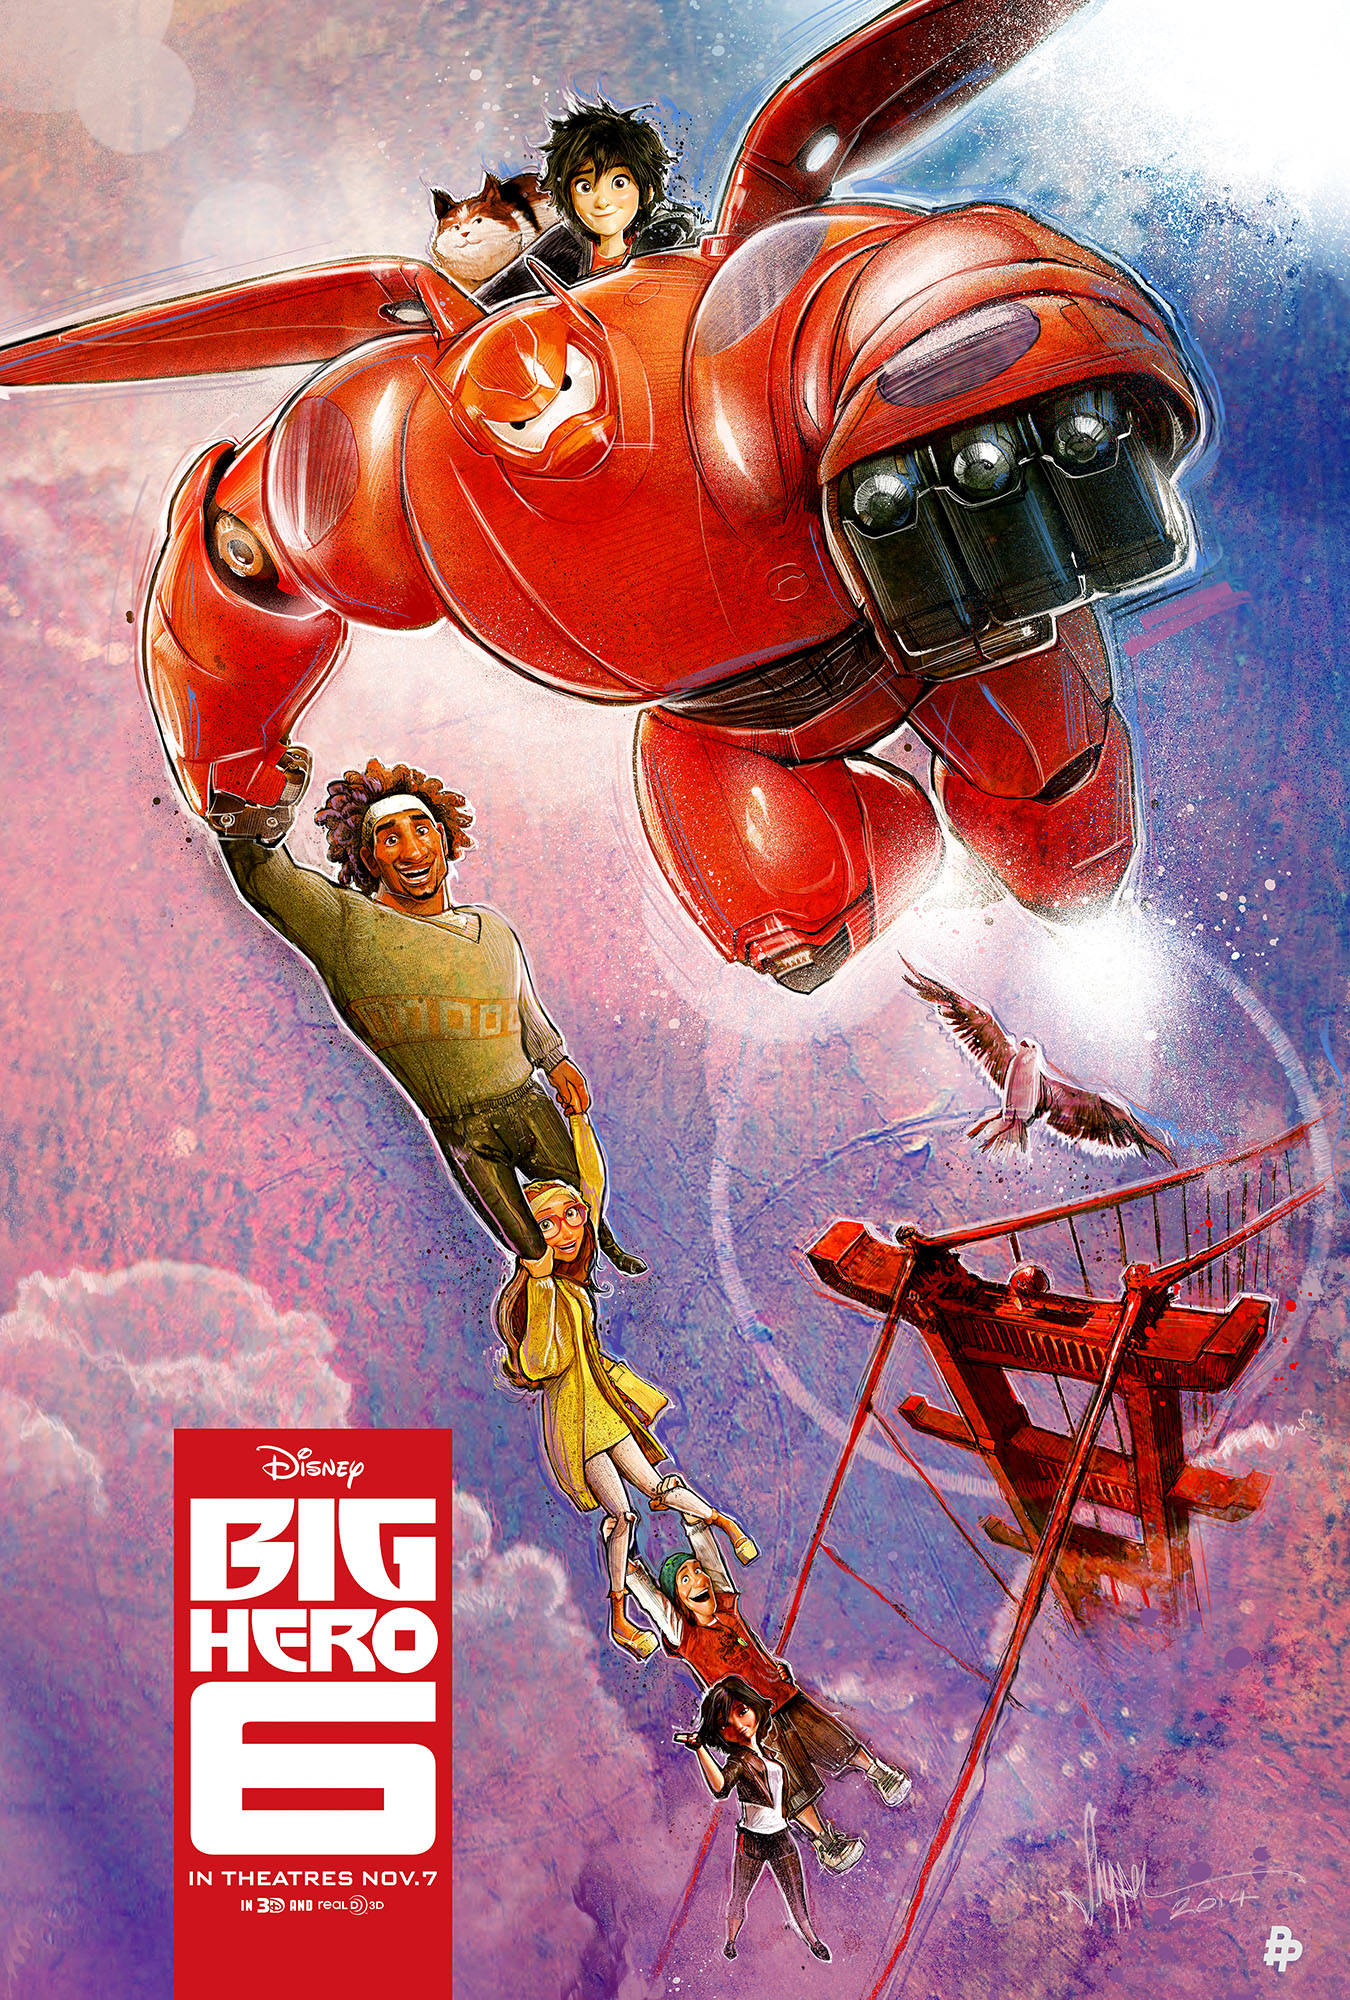 EXCLUSIVE! The Poster Posse Rolls Out Phase 2 For Disney's “Big Hero 6” | MEOKCA Poster Posse